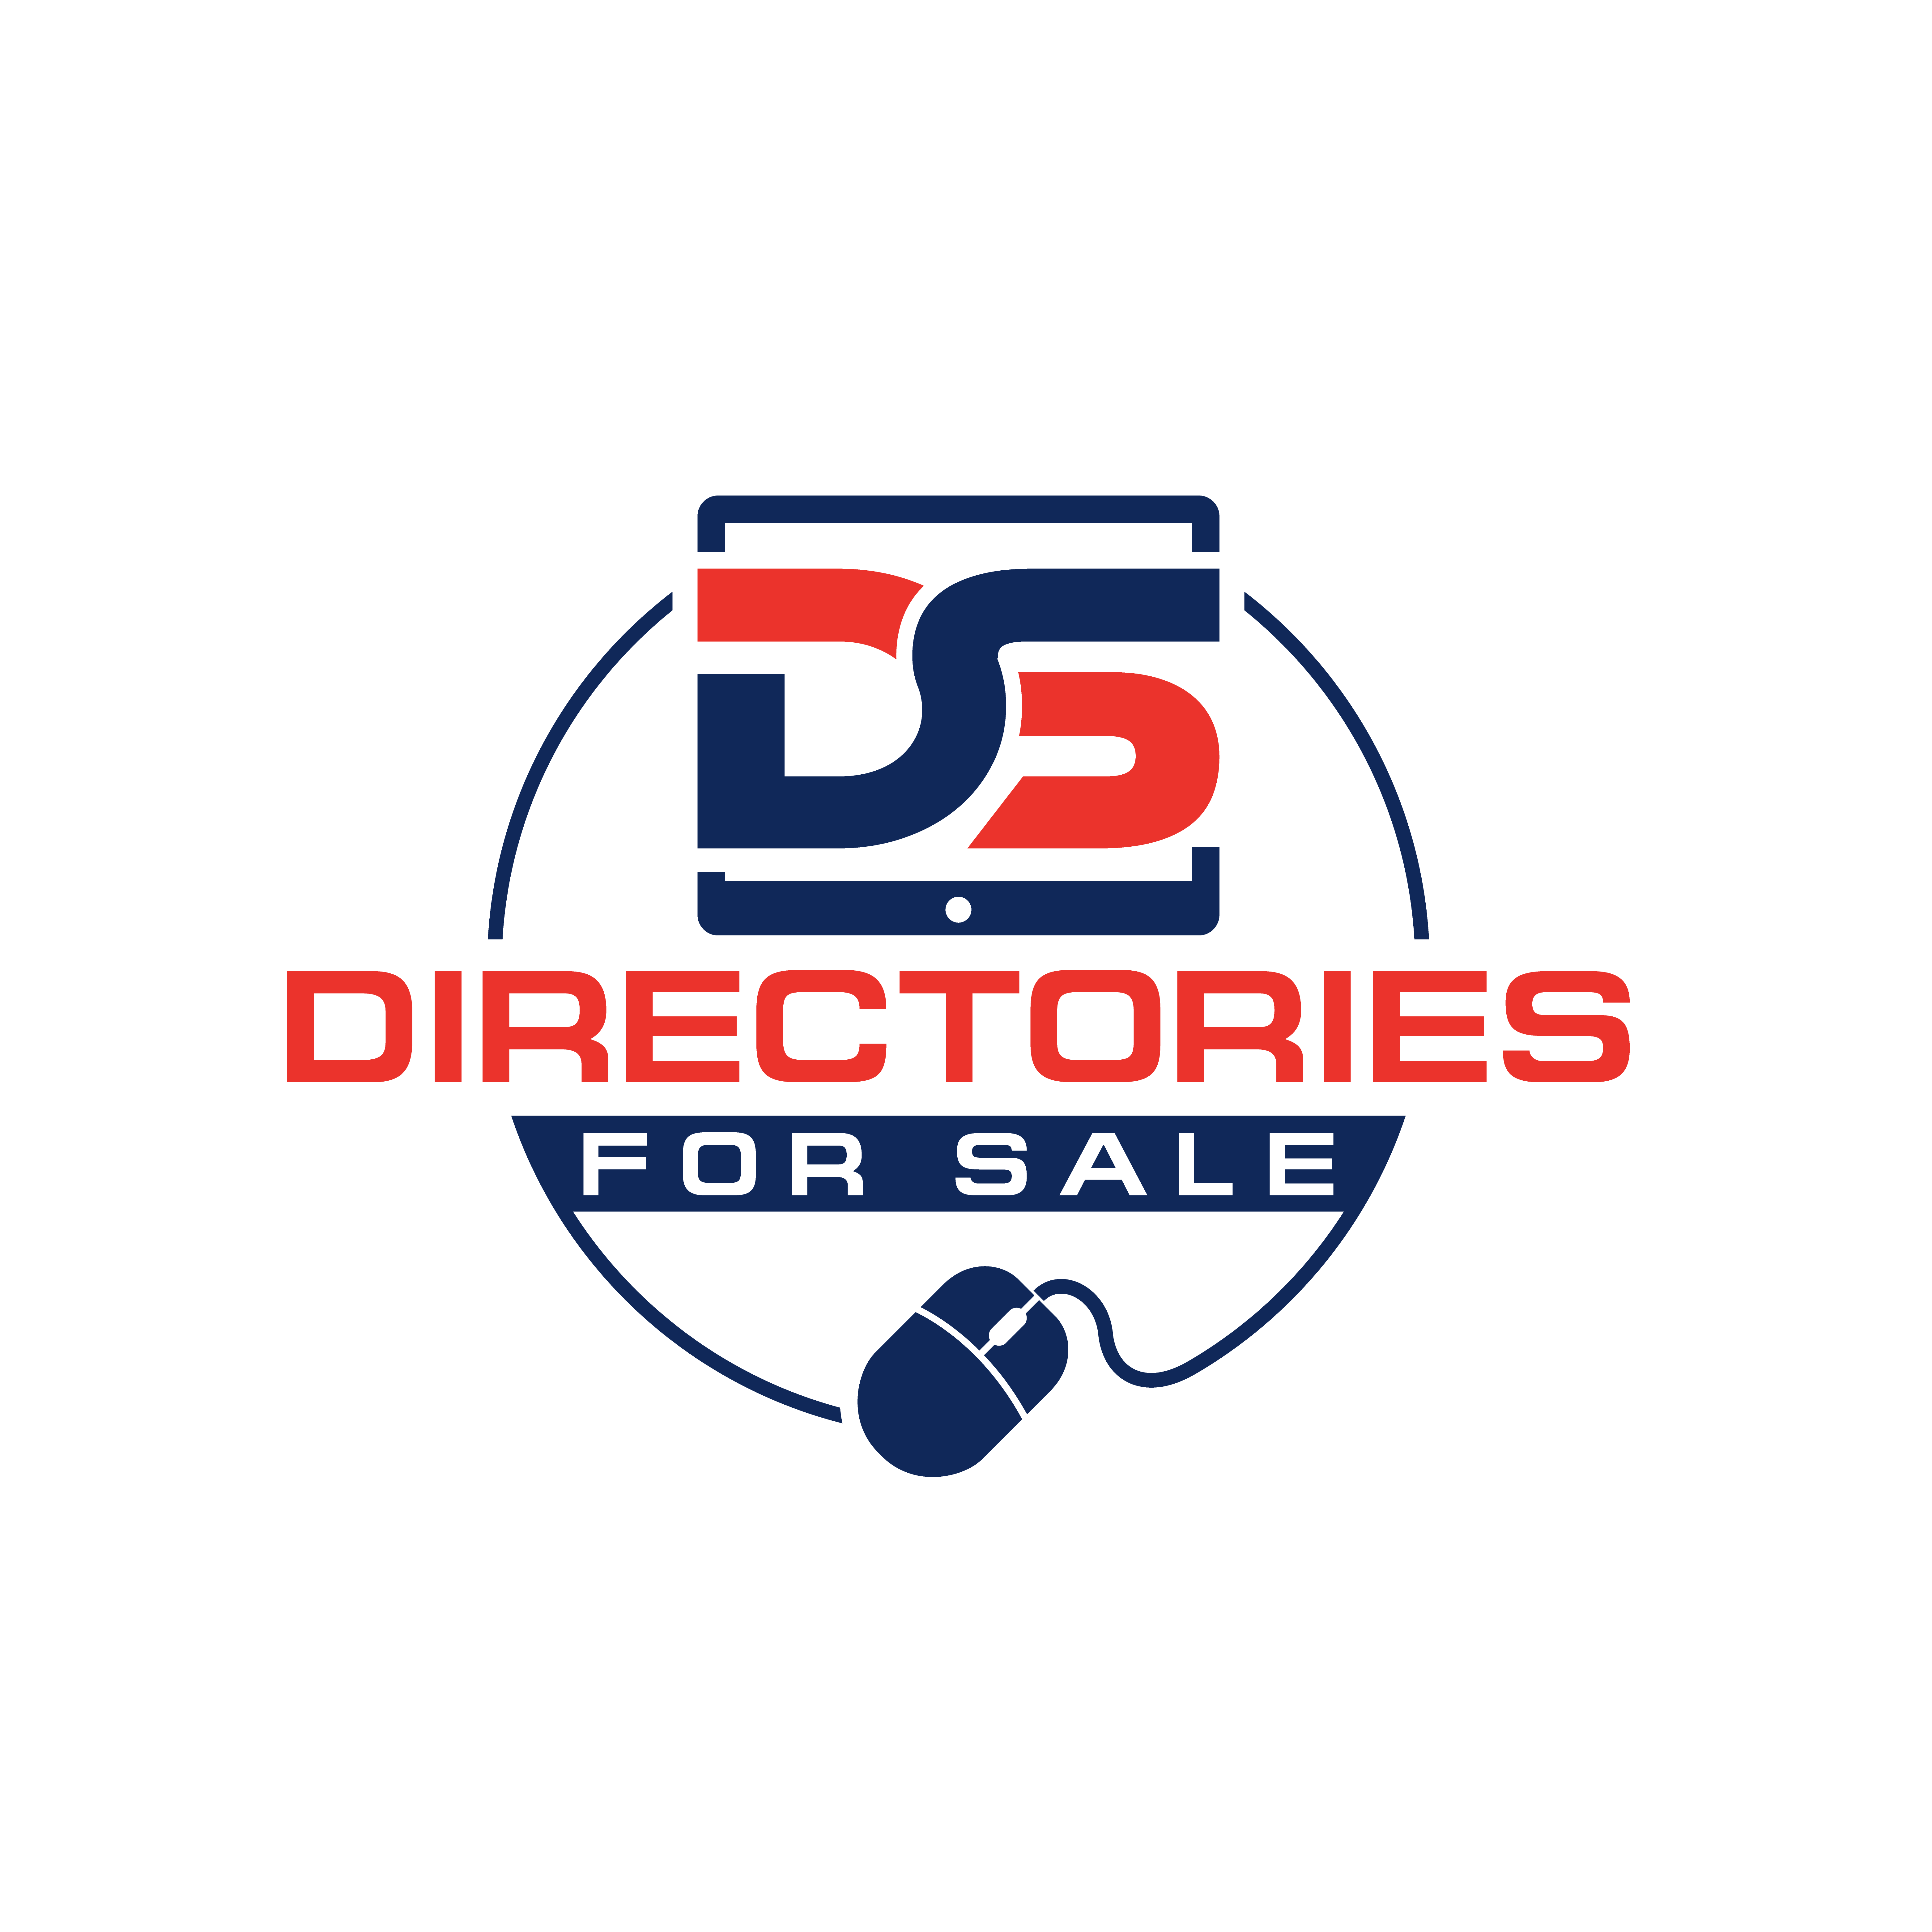 Business Directories For Sale